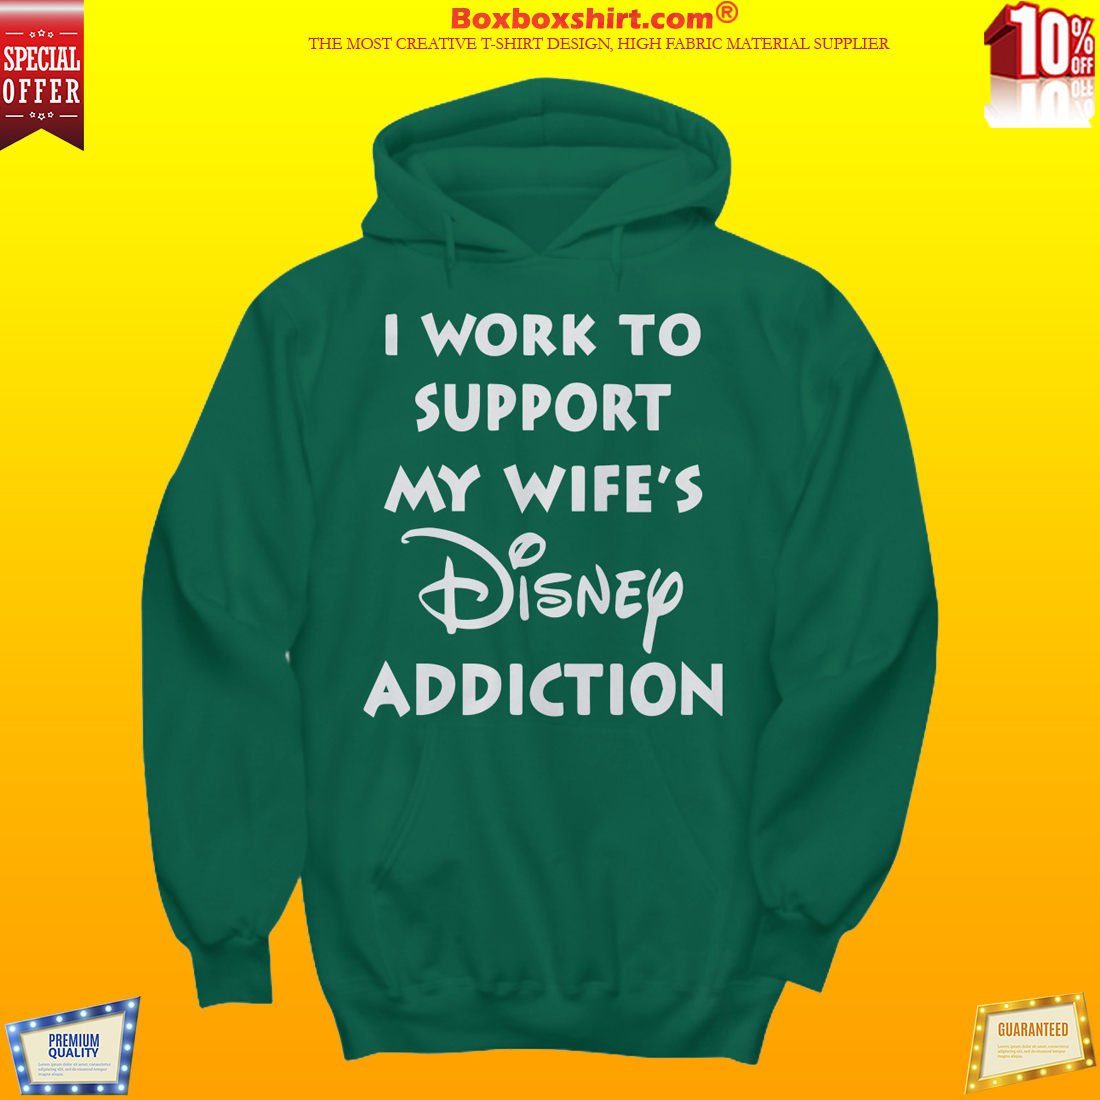 I work to support my wife Disney addiction shirt and hoodies